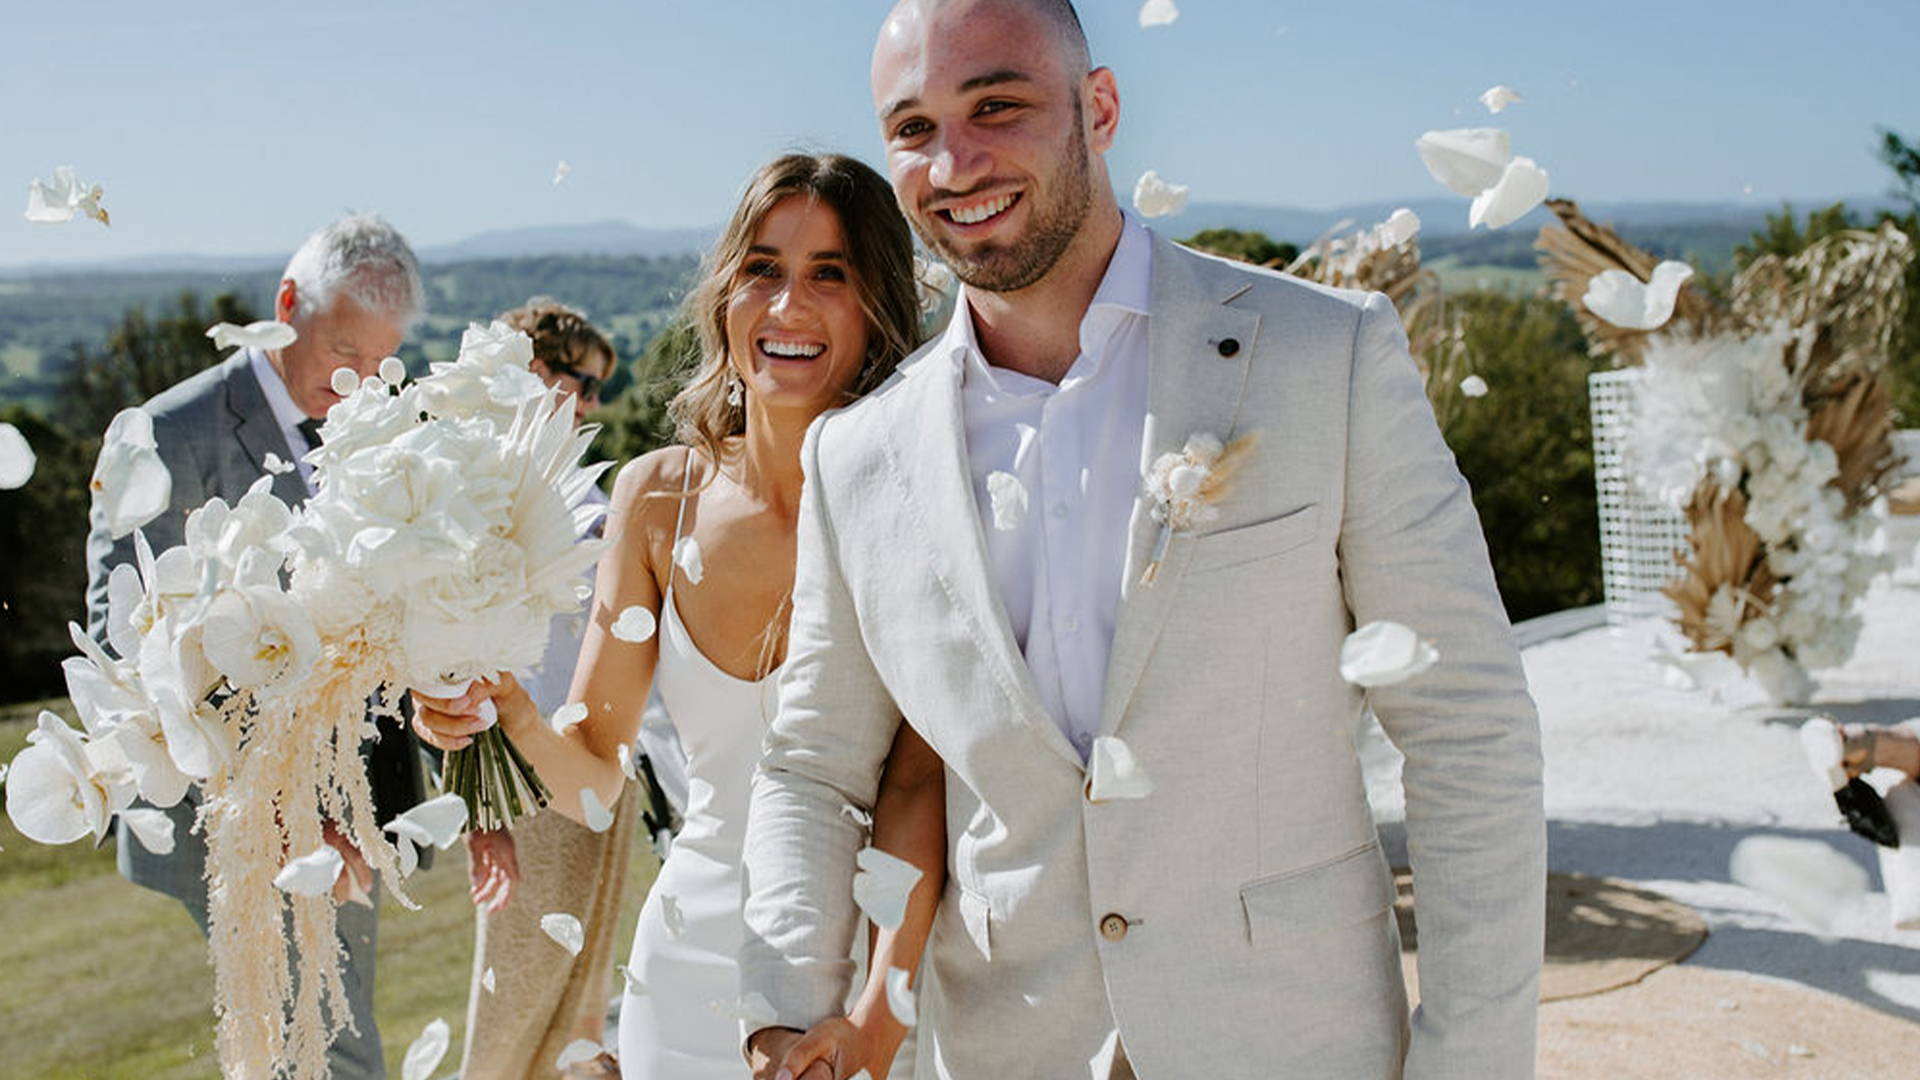 Groom wearing a beige suit walking with his bride with white flowers